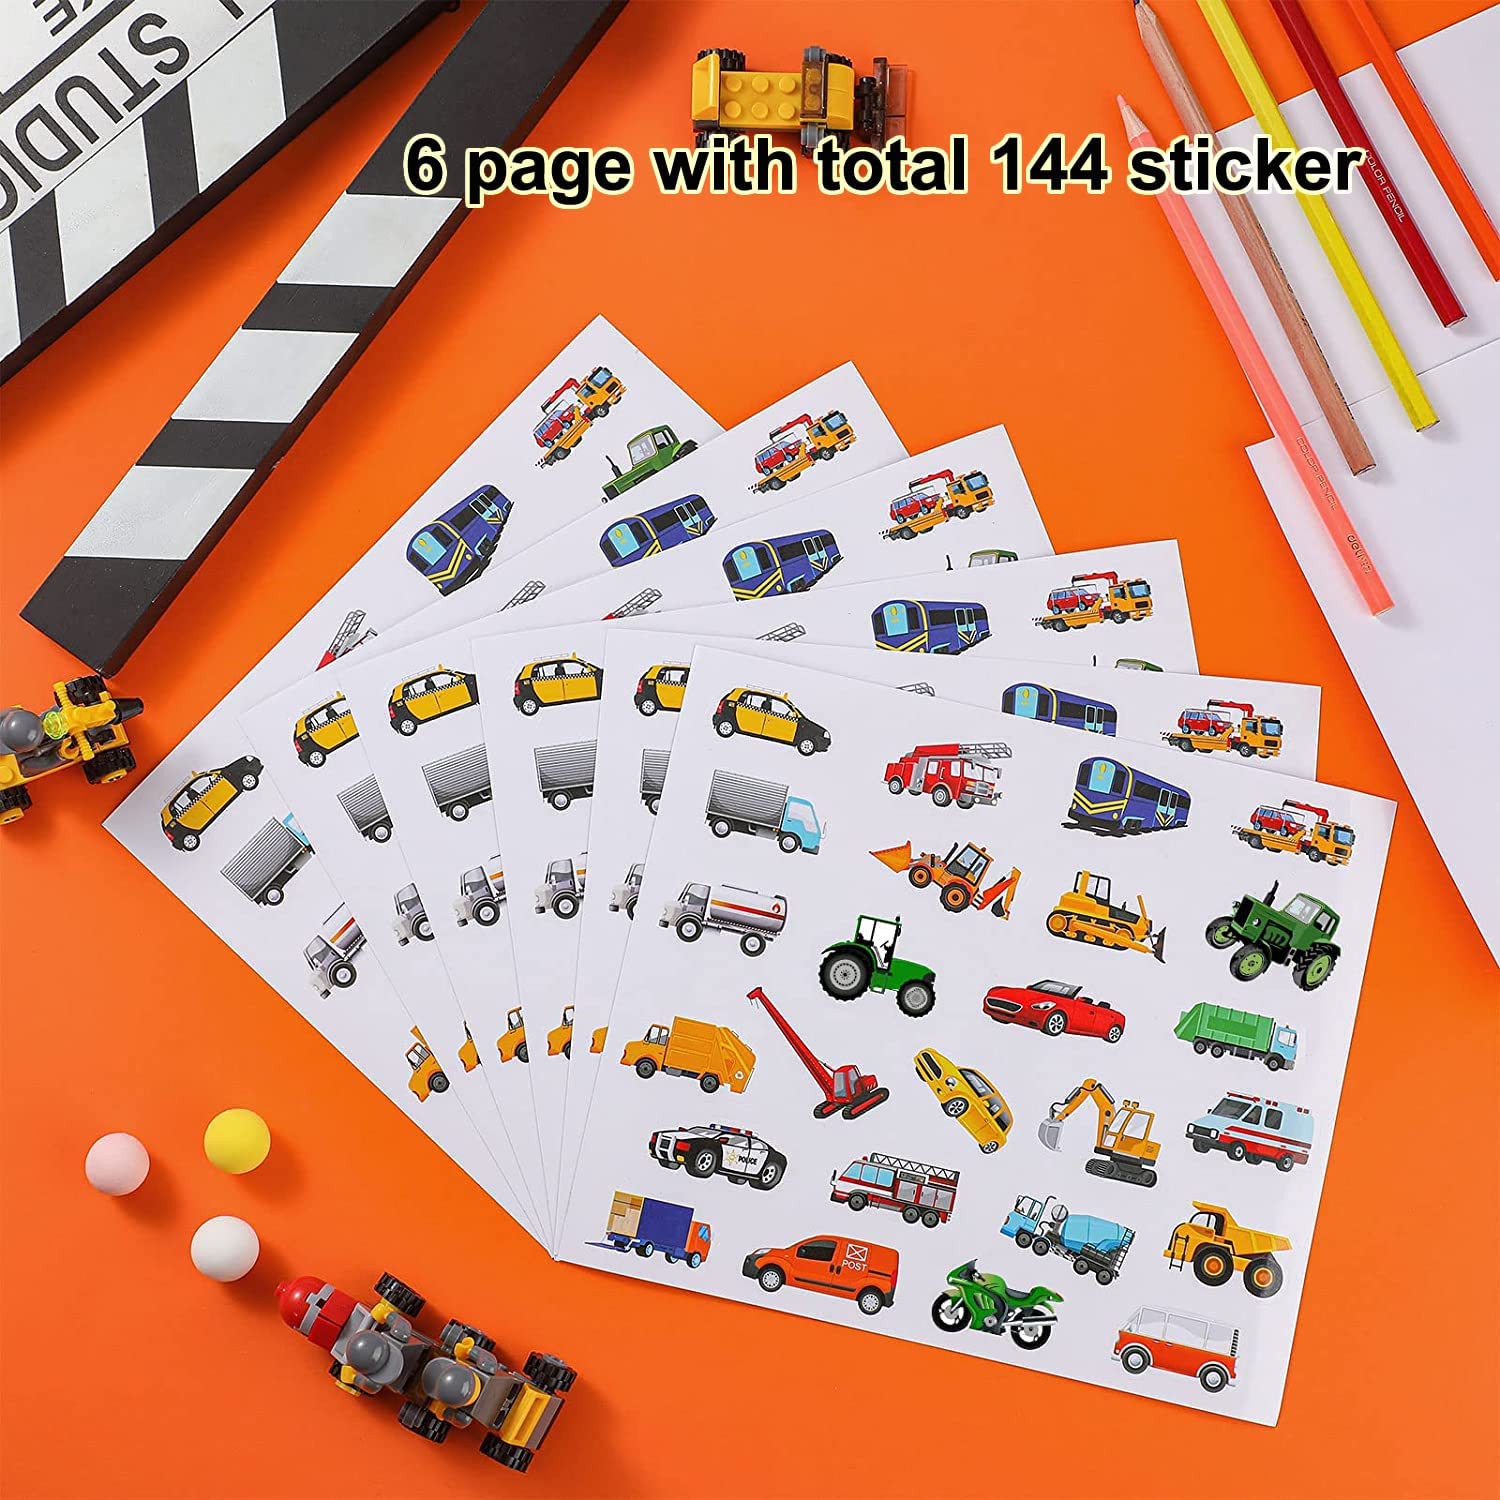 Adhesive sticker in car shapes